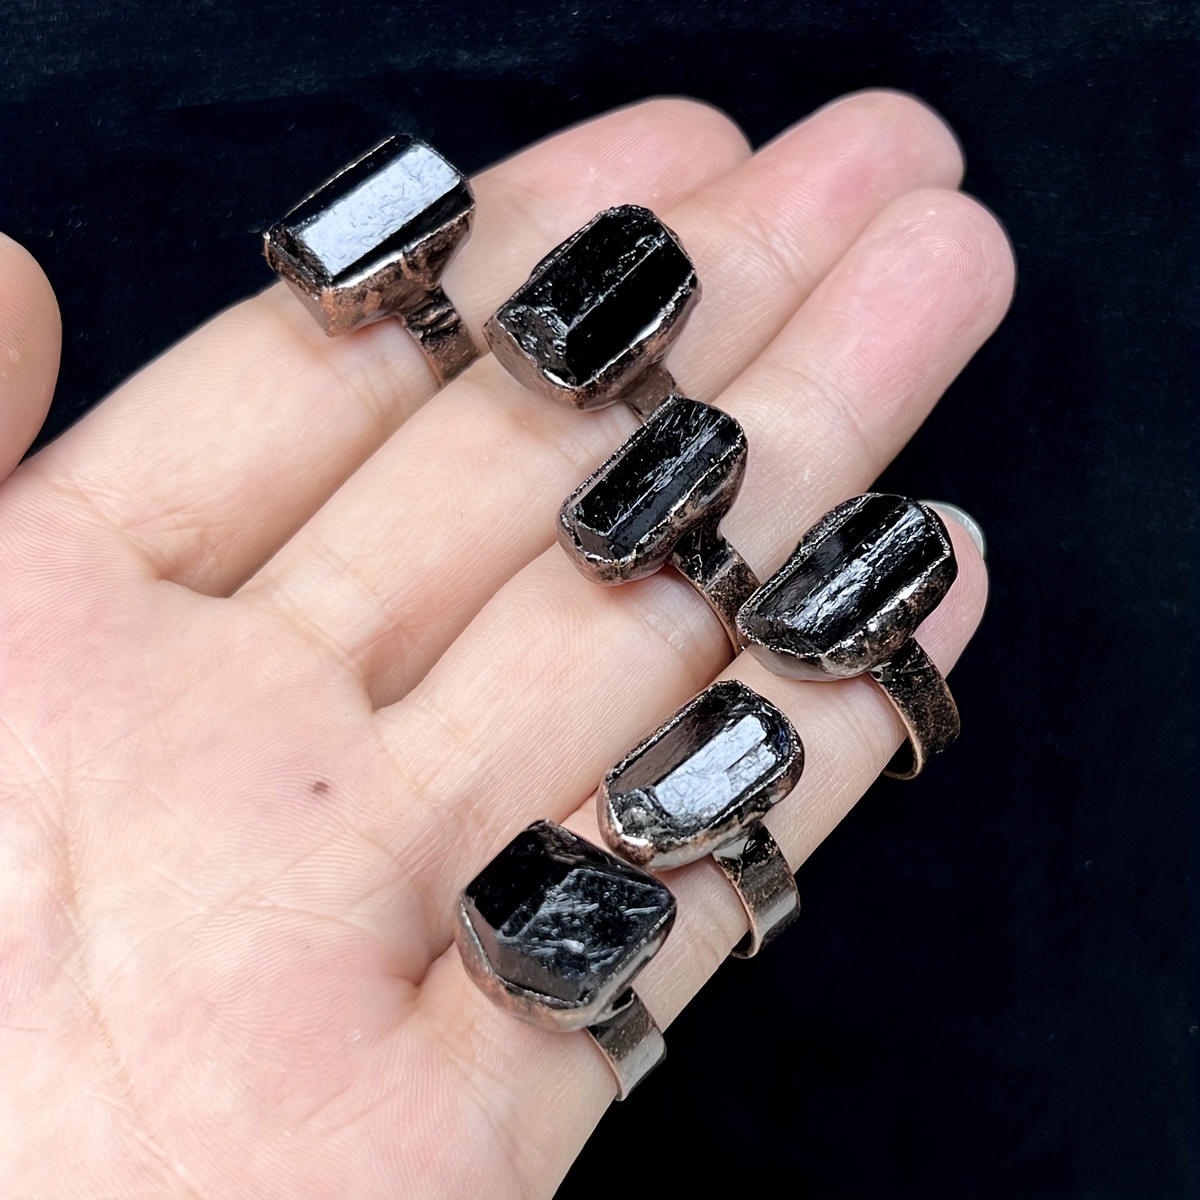 

1pc Natural Black Tourmaline Ring Shape Of Stone Is Uncertain It's Normal If There Are Sand Cracks On The Stone Cause It's Pure Natural Adjustable Jewelry For Men And Women